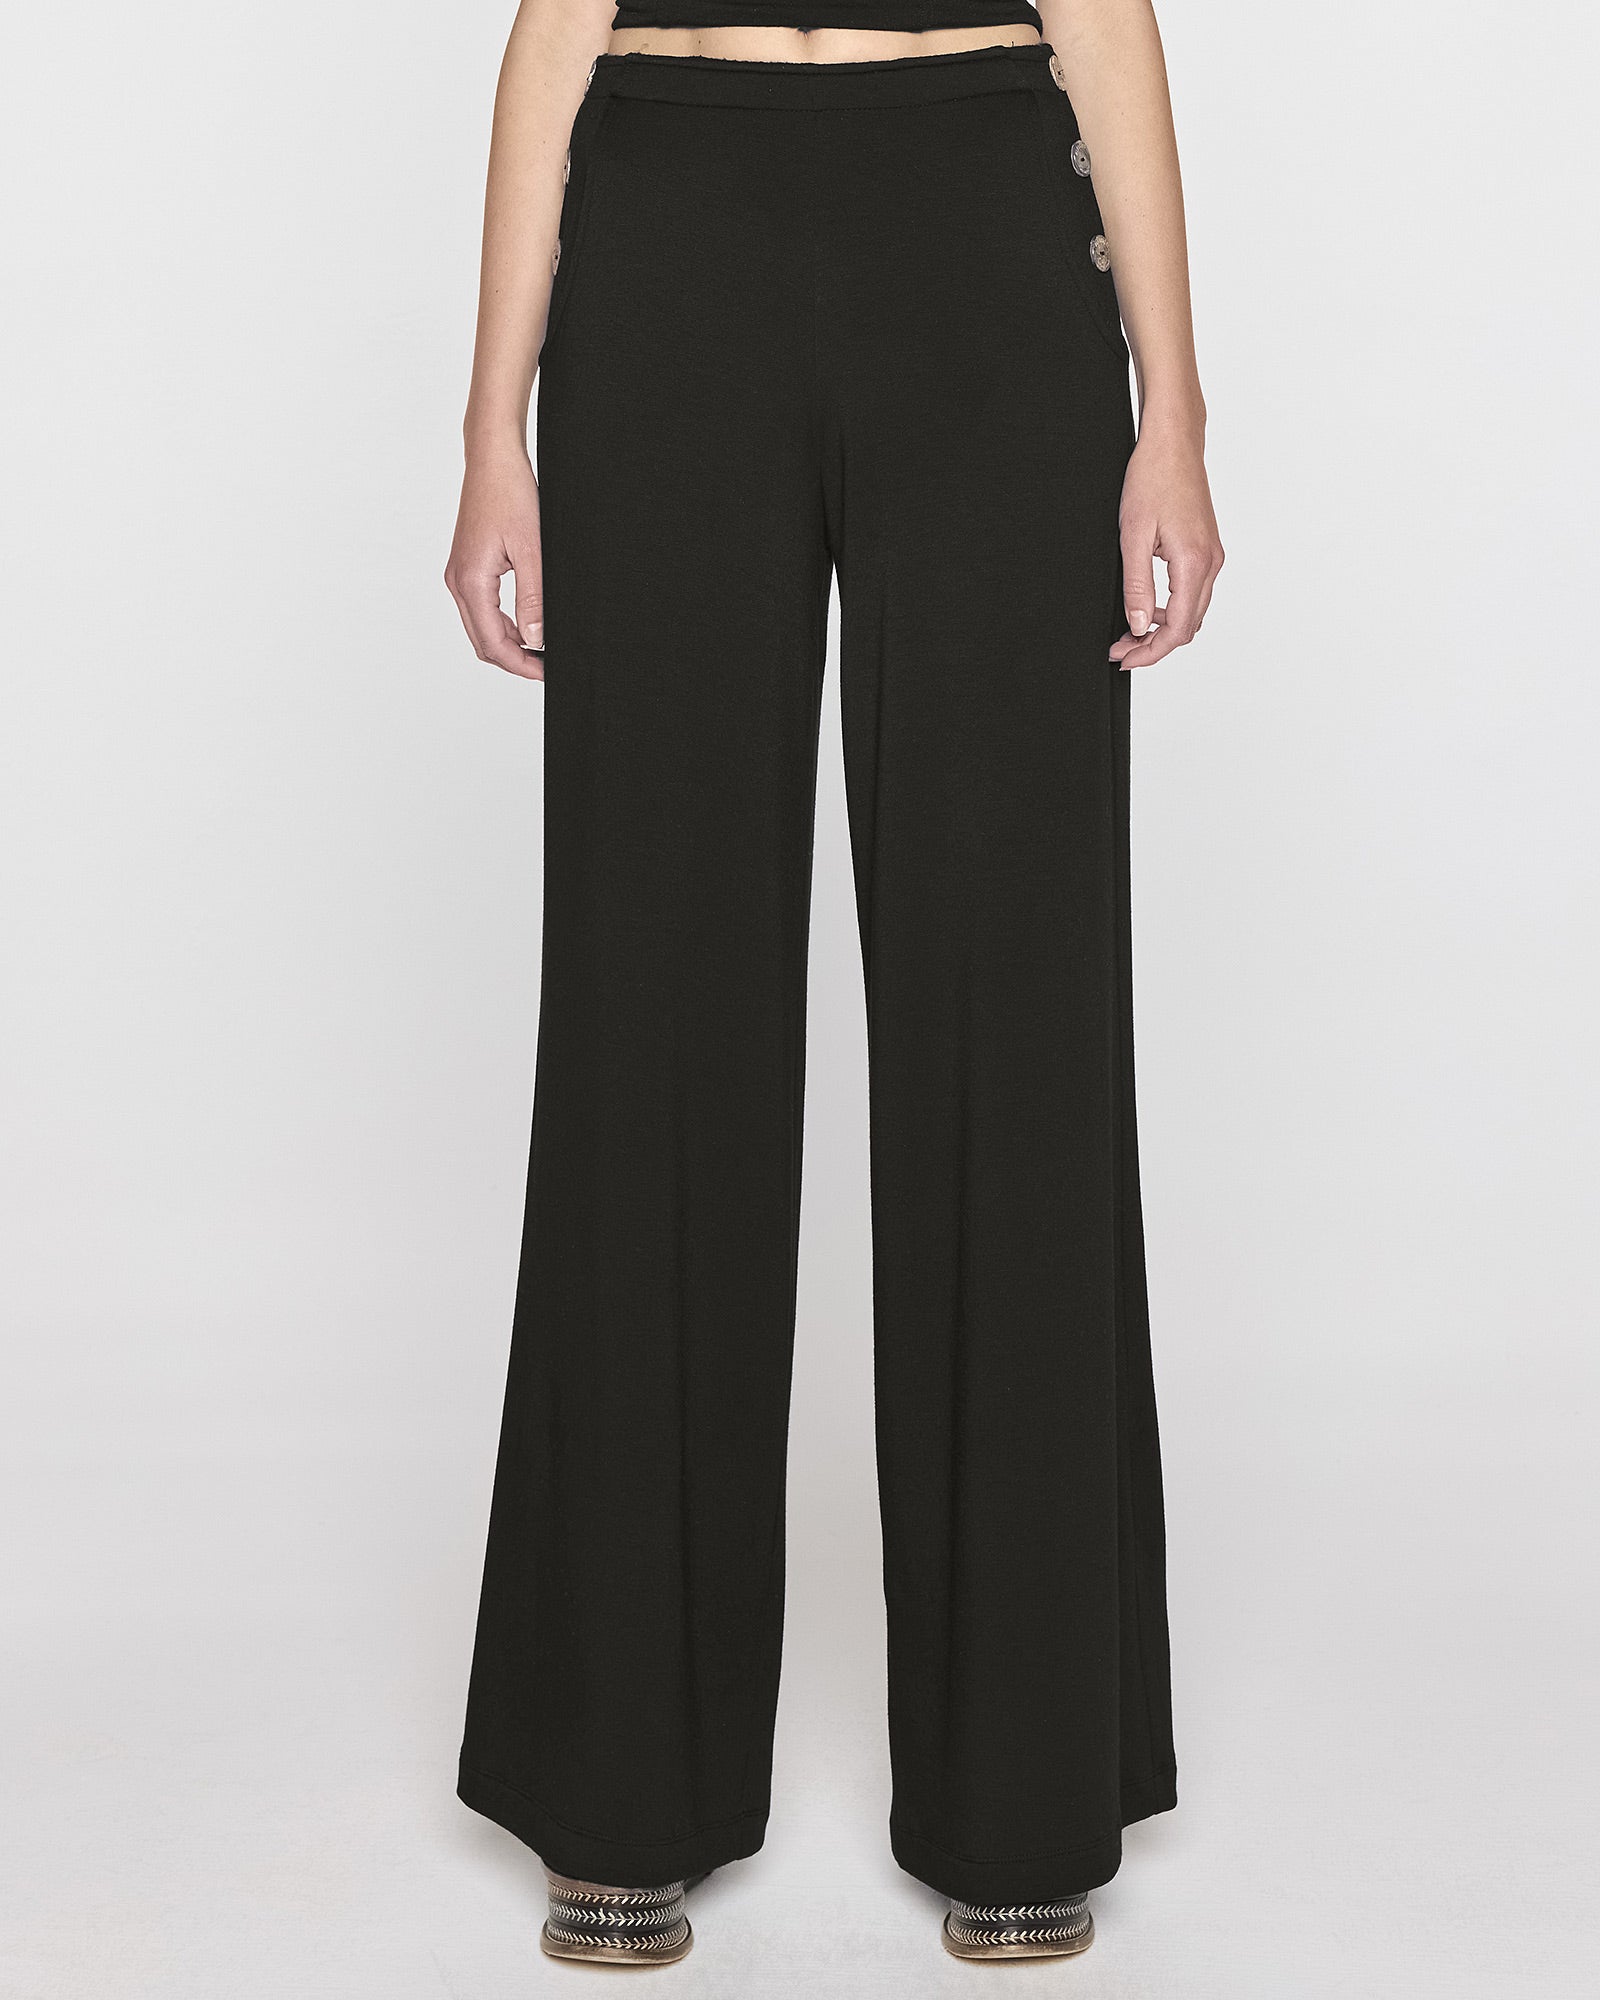 Black Wide Leg Pant with Button Detail | Everard's Clothing